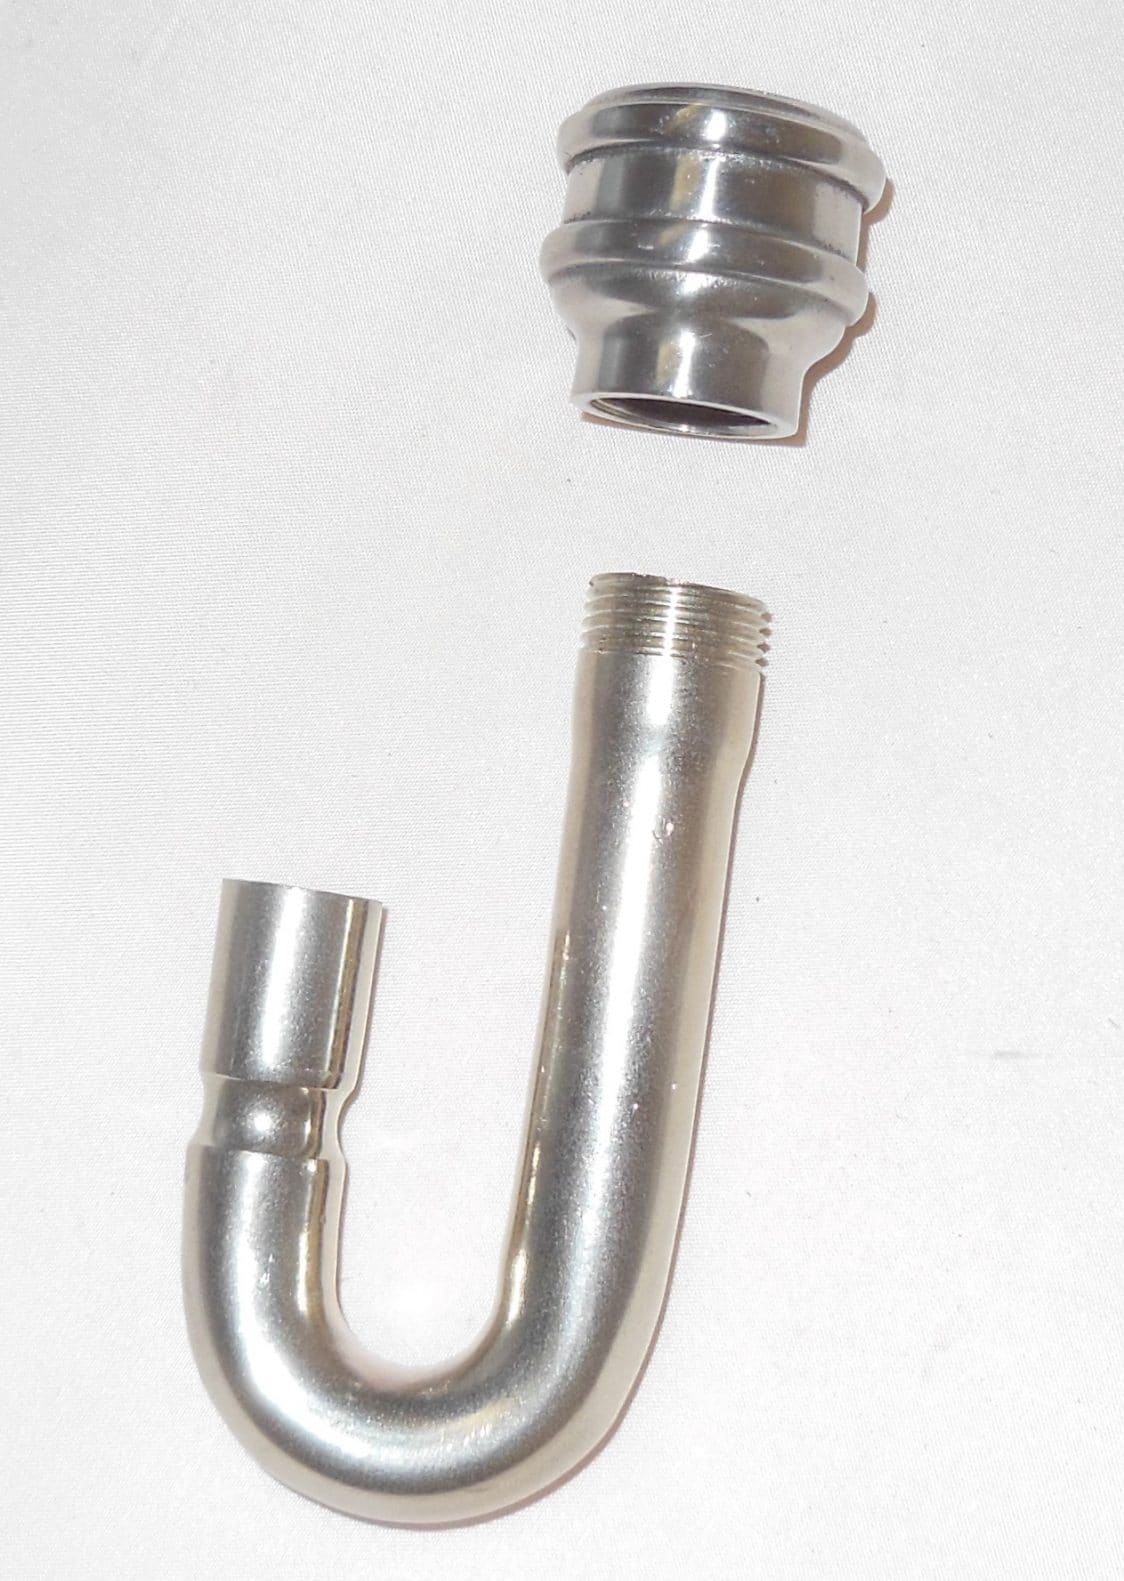 HP Nozzle and Mixing tube